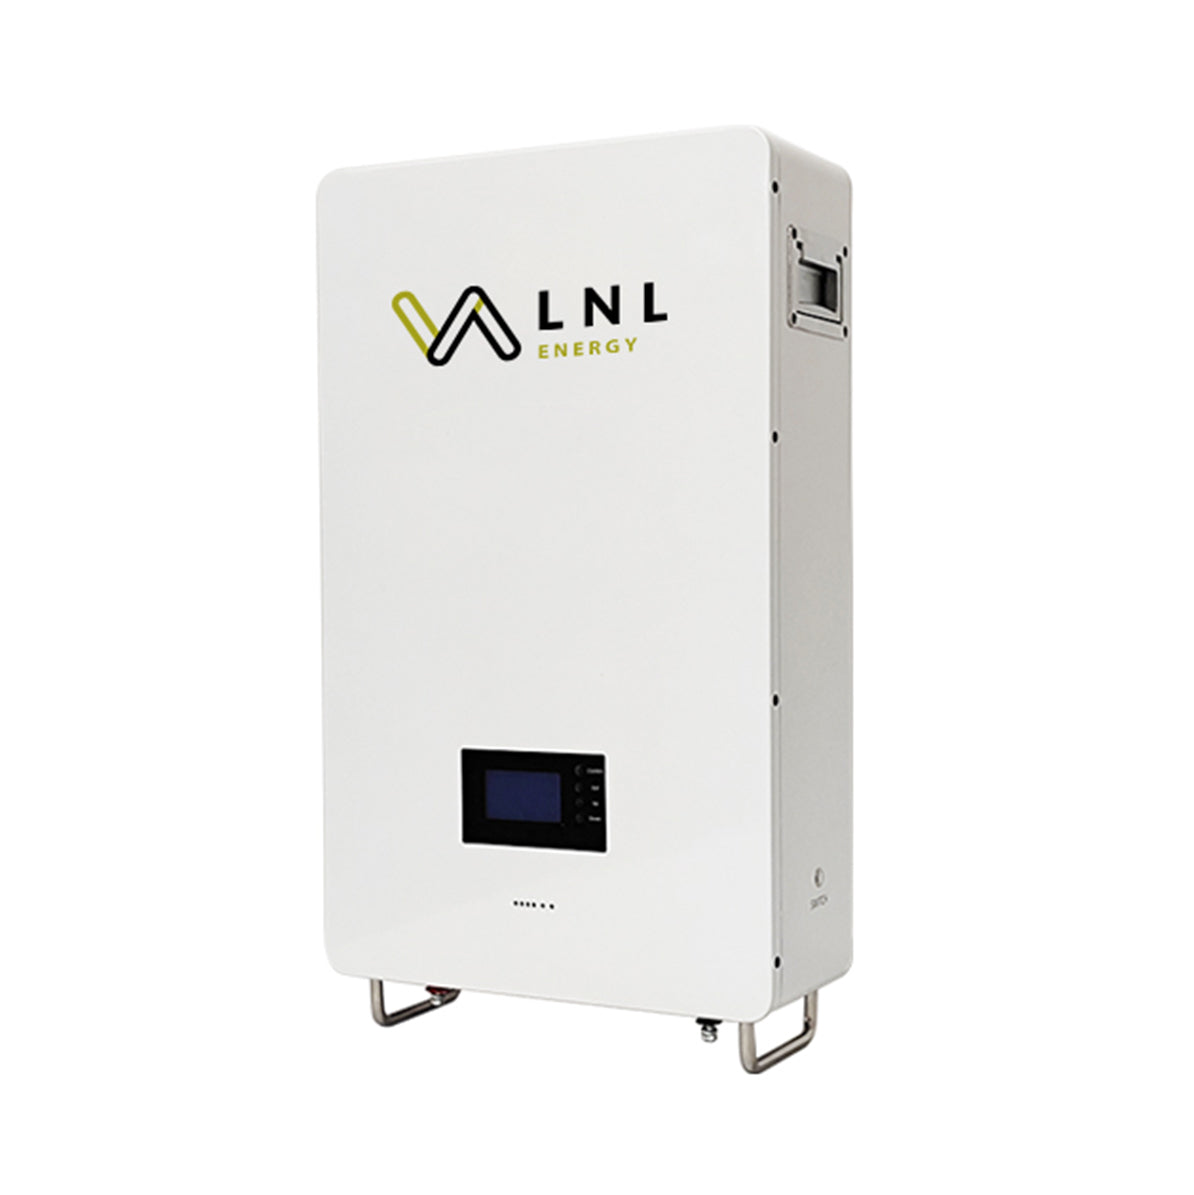 Package A1 - 5kW Deye and LNL Energy backup system